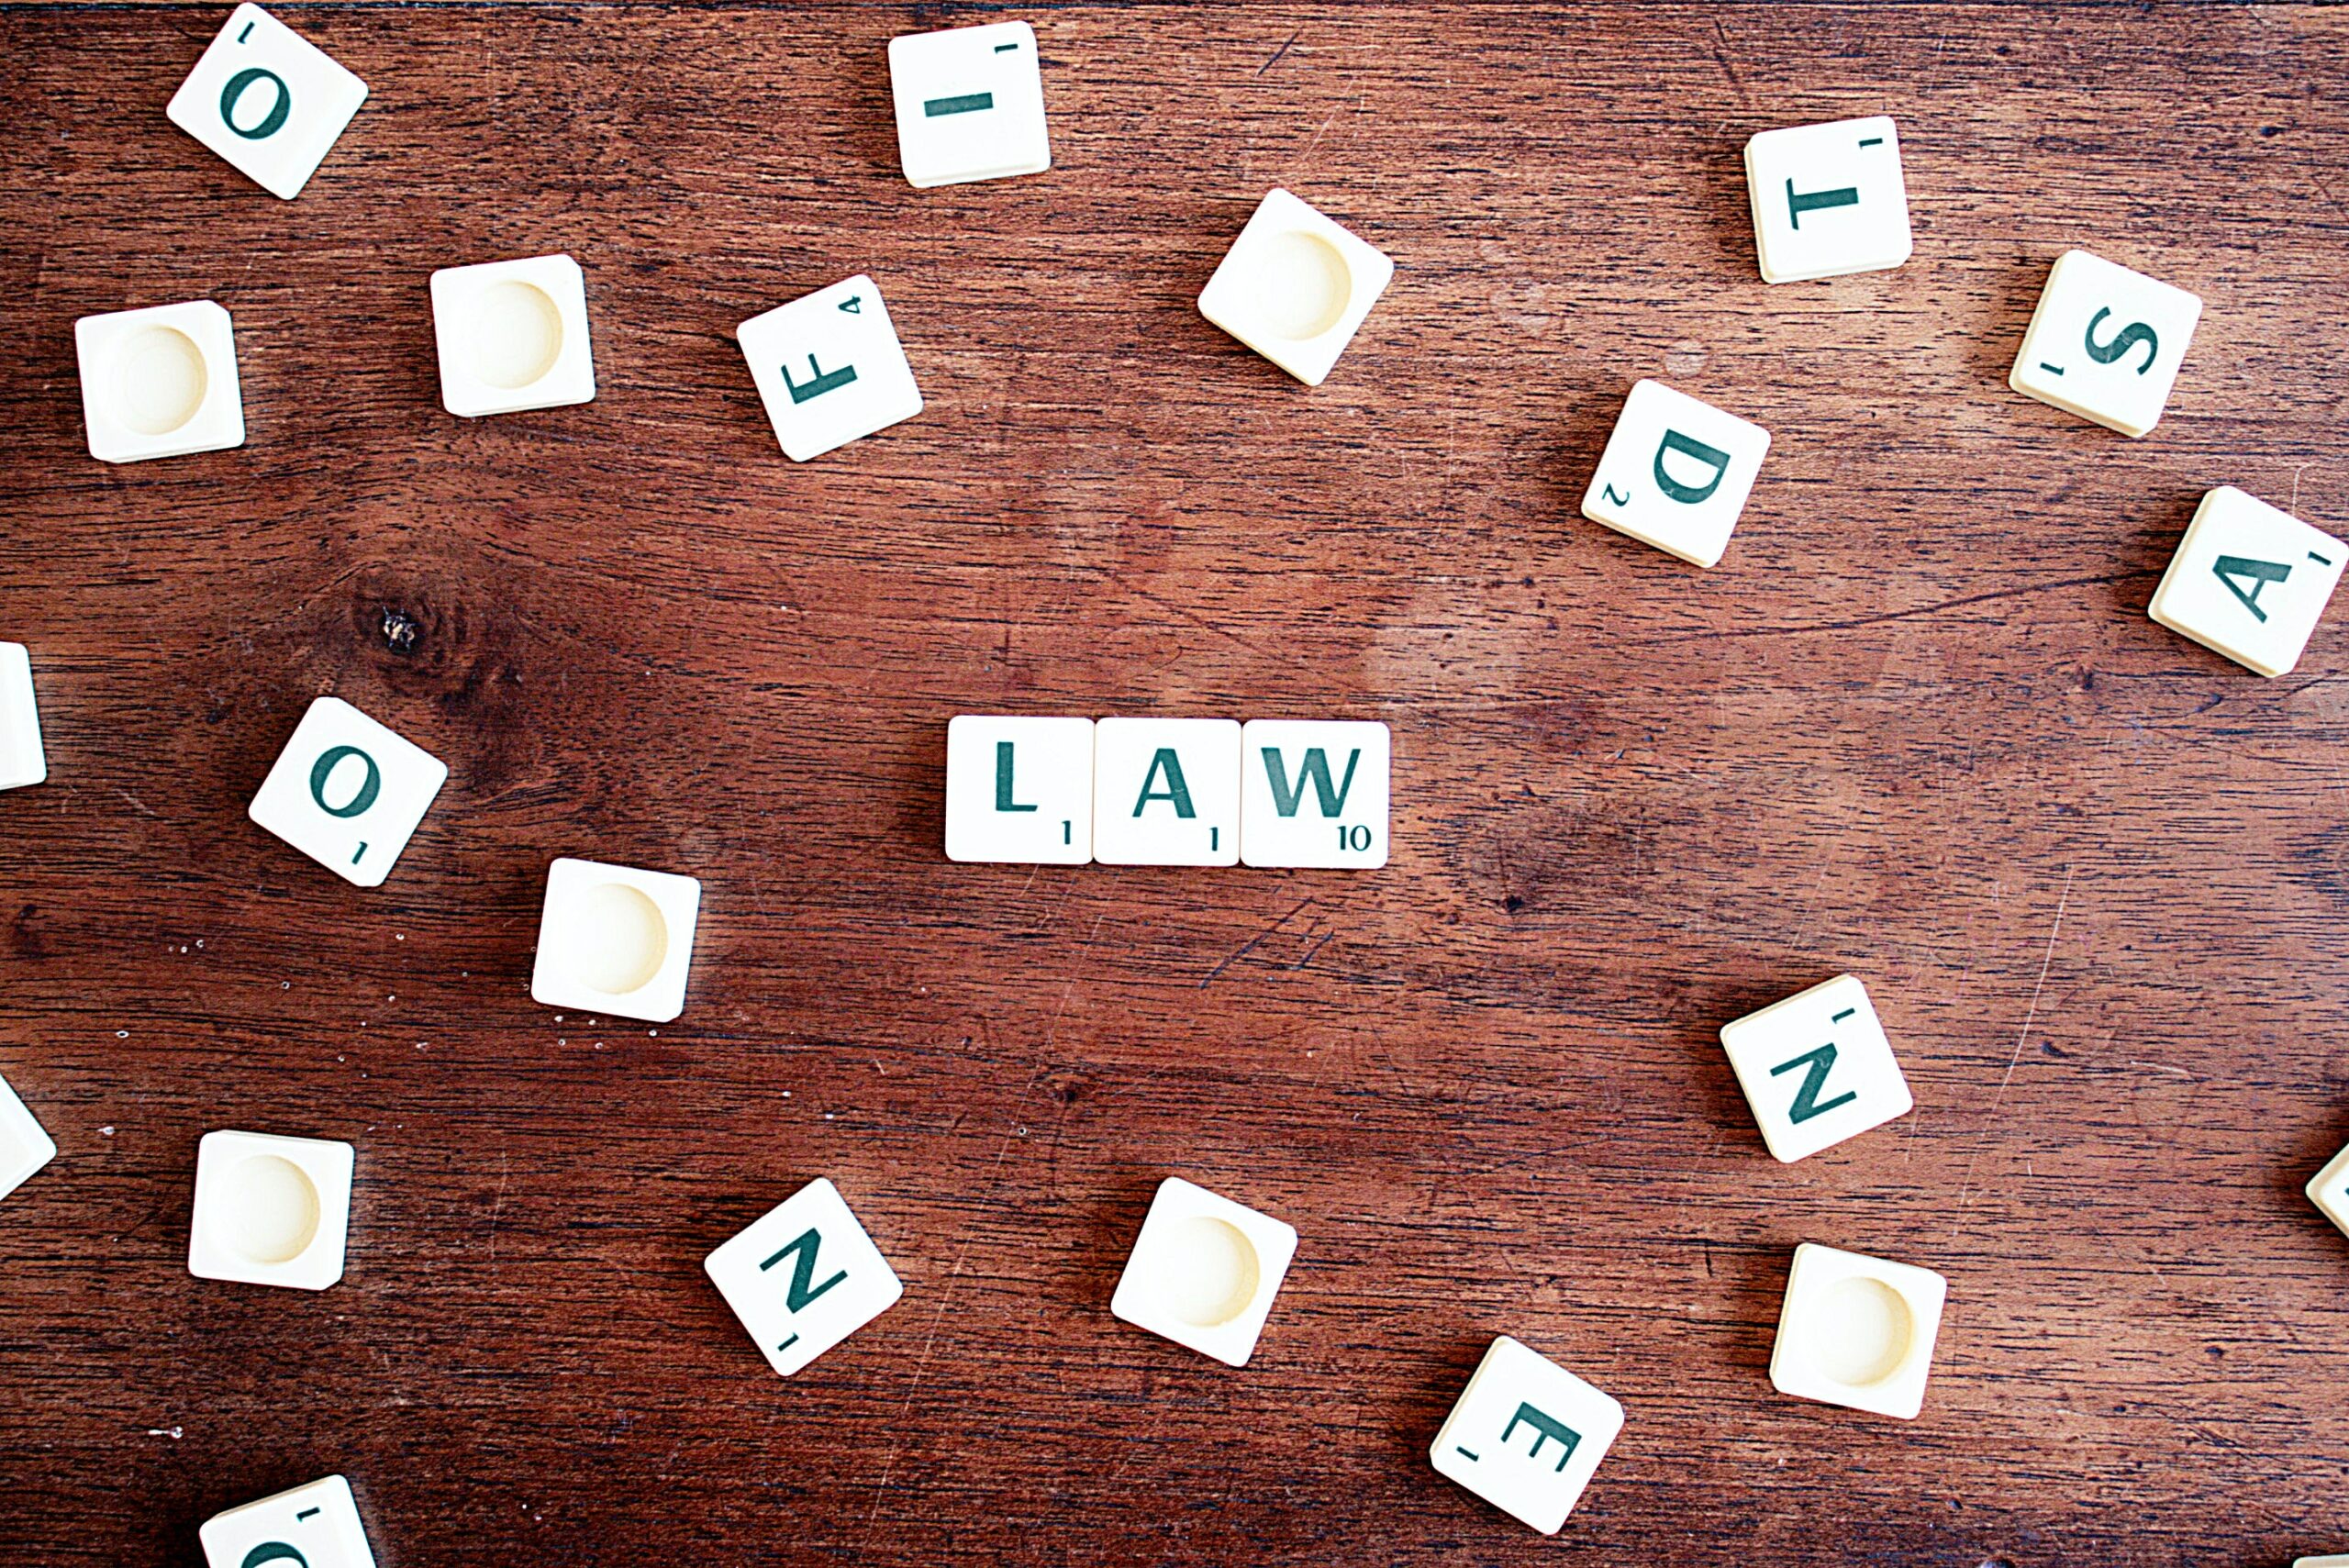 Scrabble tiles laid out on a brown wooden table with the word 'LAW' spelled out